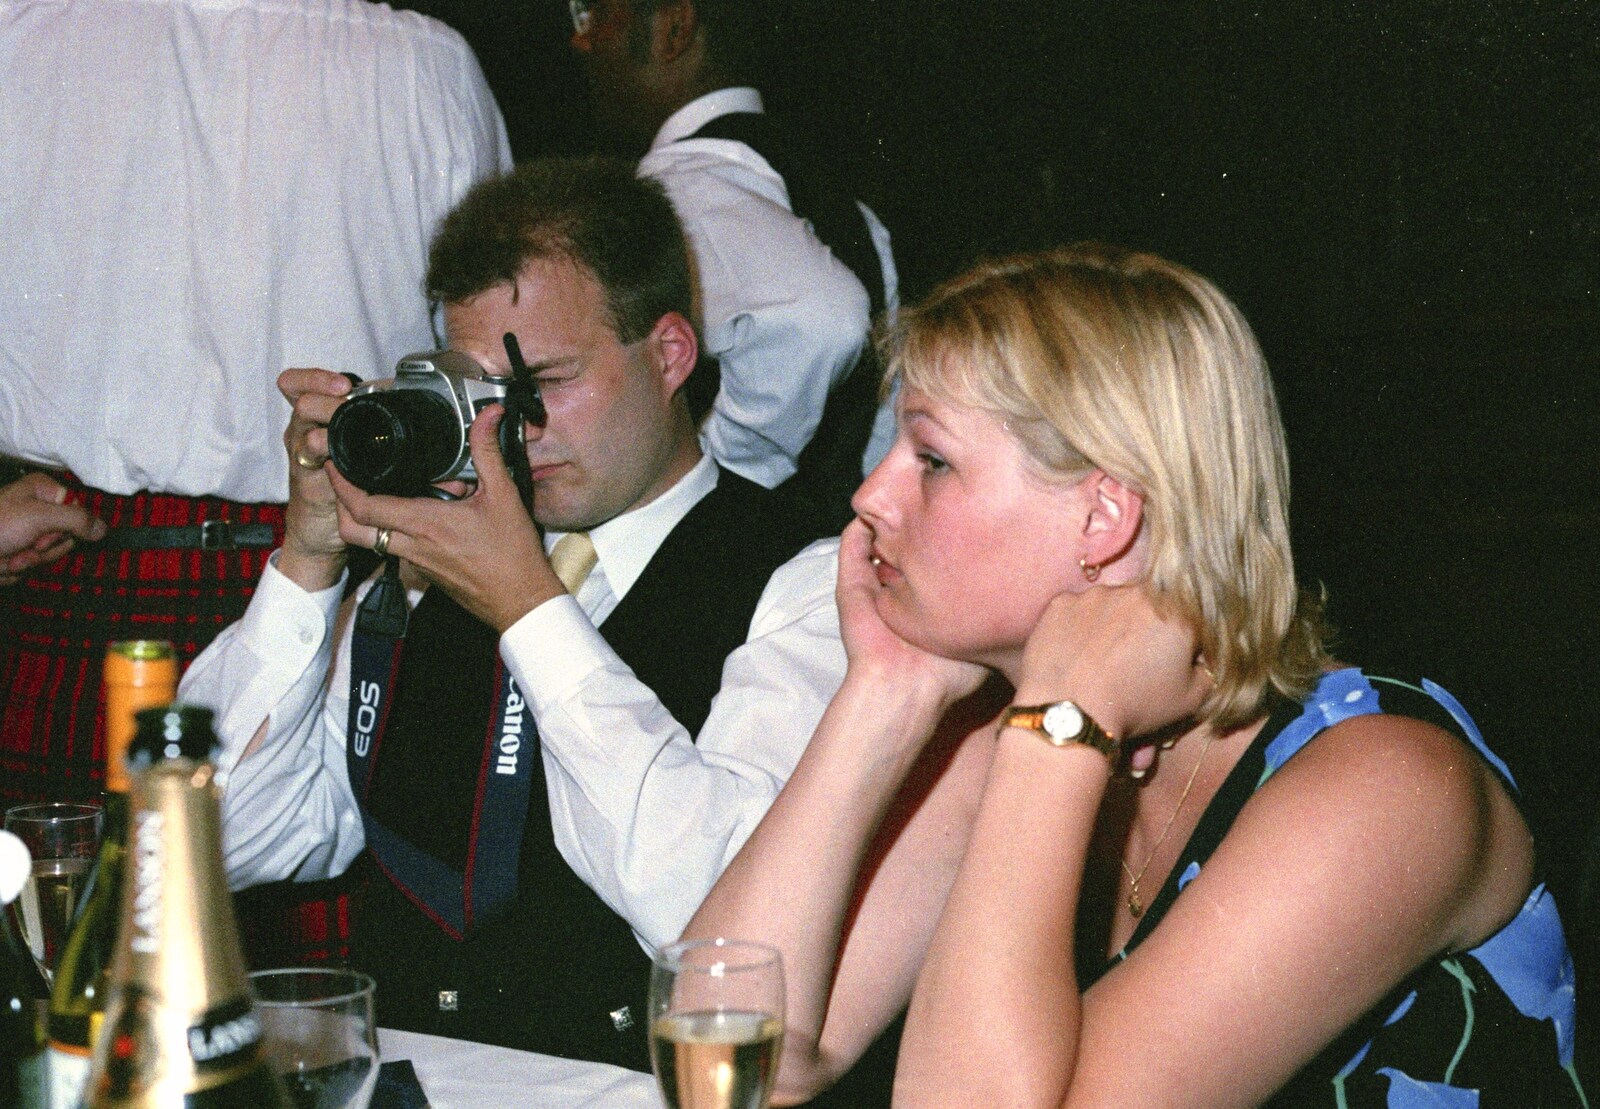 Hamish and Jane's Wedding, Canford School, Wimborne, Dorset - 5th August 1998: Martin's girlfriend looks glum as he fiddles with a camera